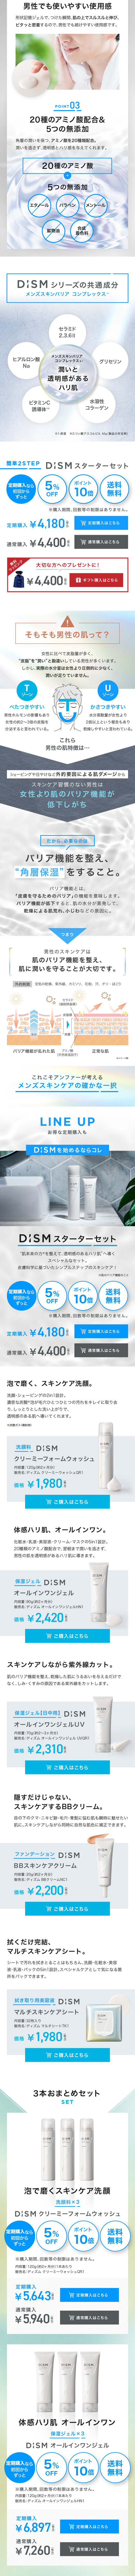 DISMスターターセット_sp_2